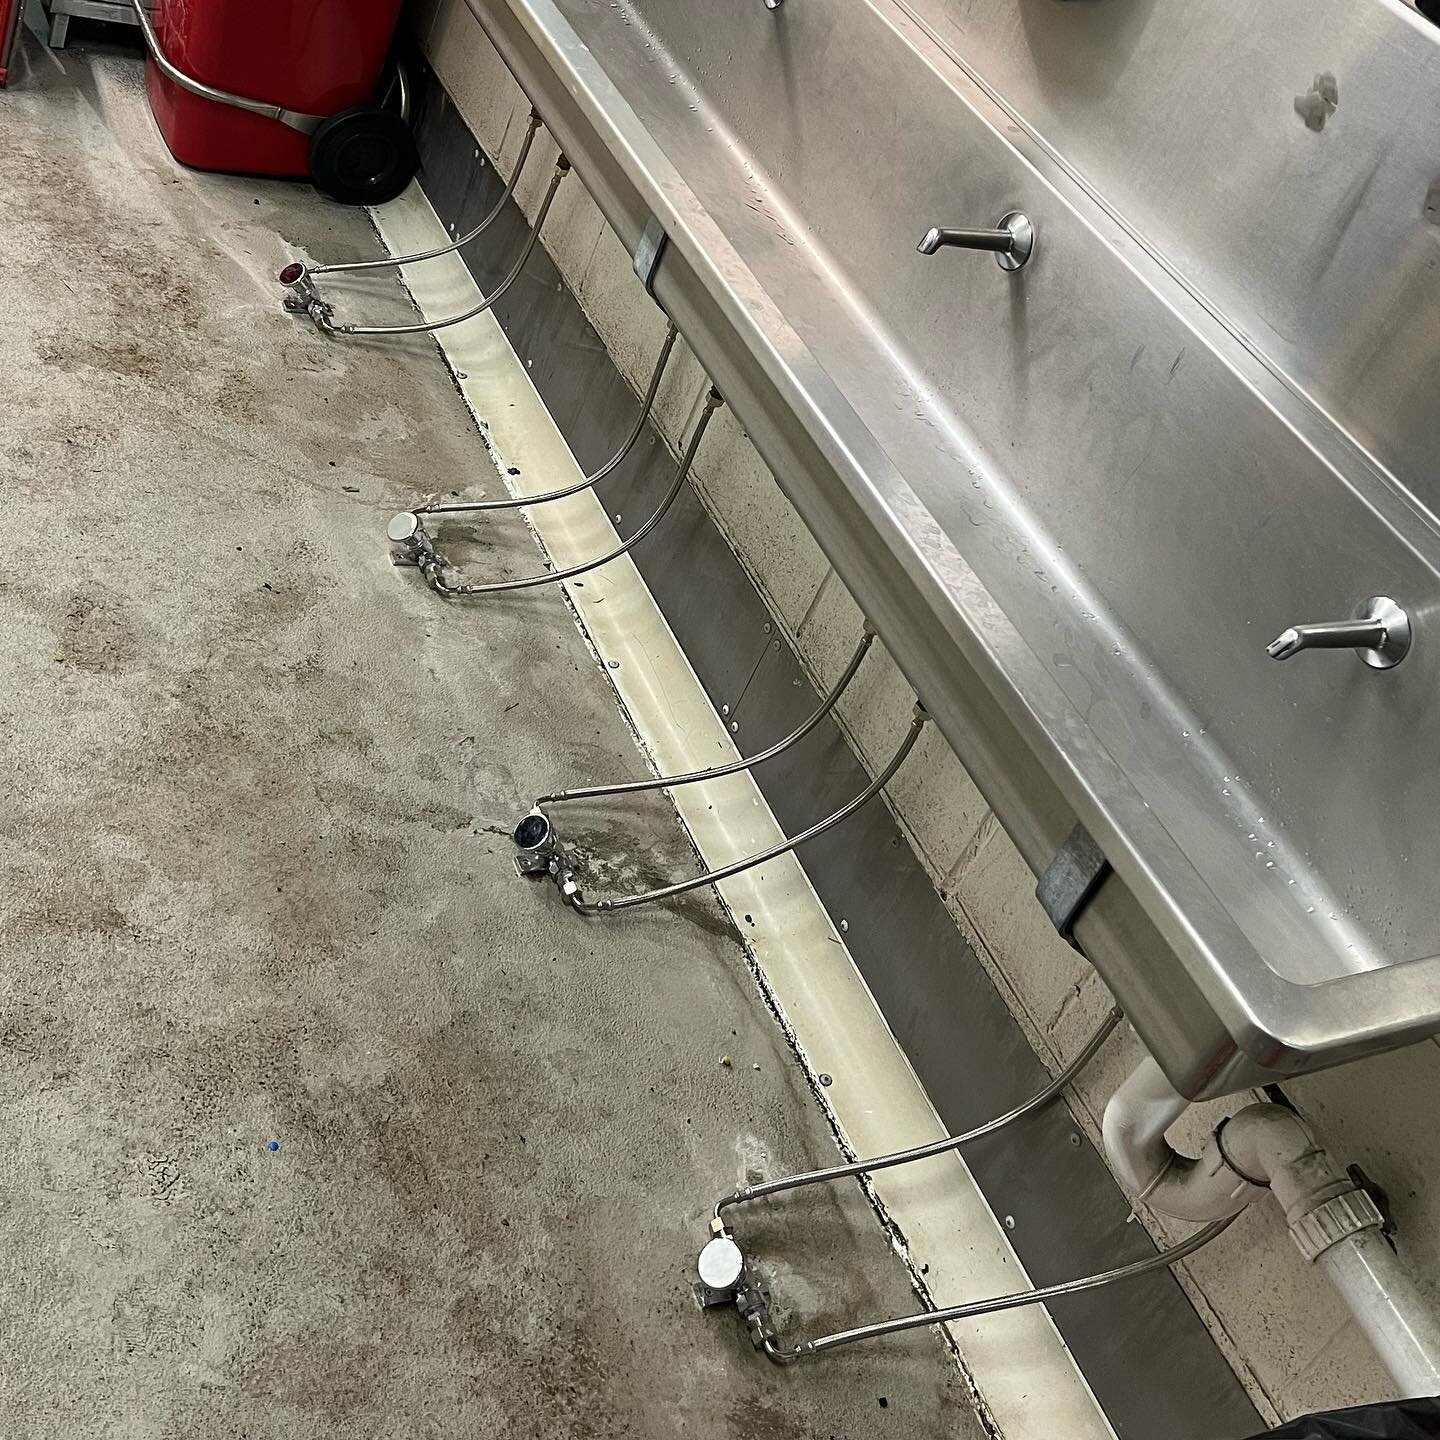 Upgrade on foot pedal hand washers. Old ones were just about warn out and had served their time. Our clients were satisfied with the new look 😎

#plumber #plumbing #melbourne #emergency #commercial #hobsonsbay #westside #24hours